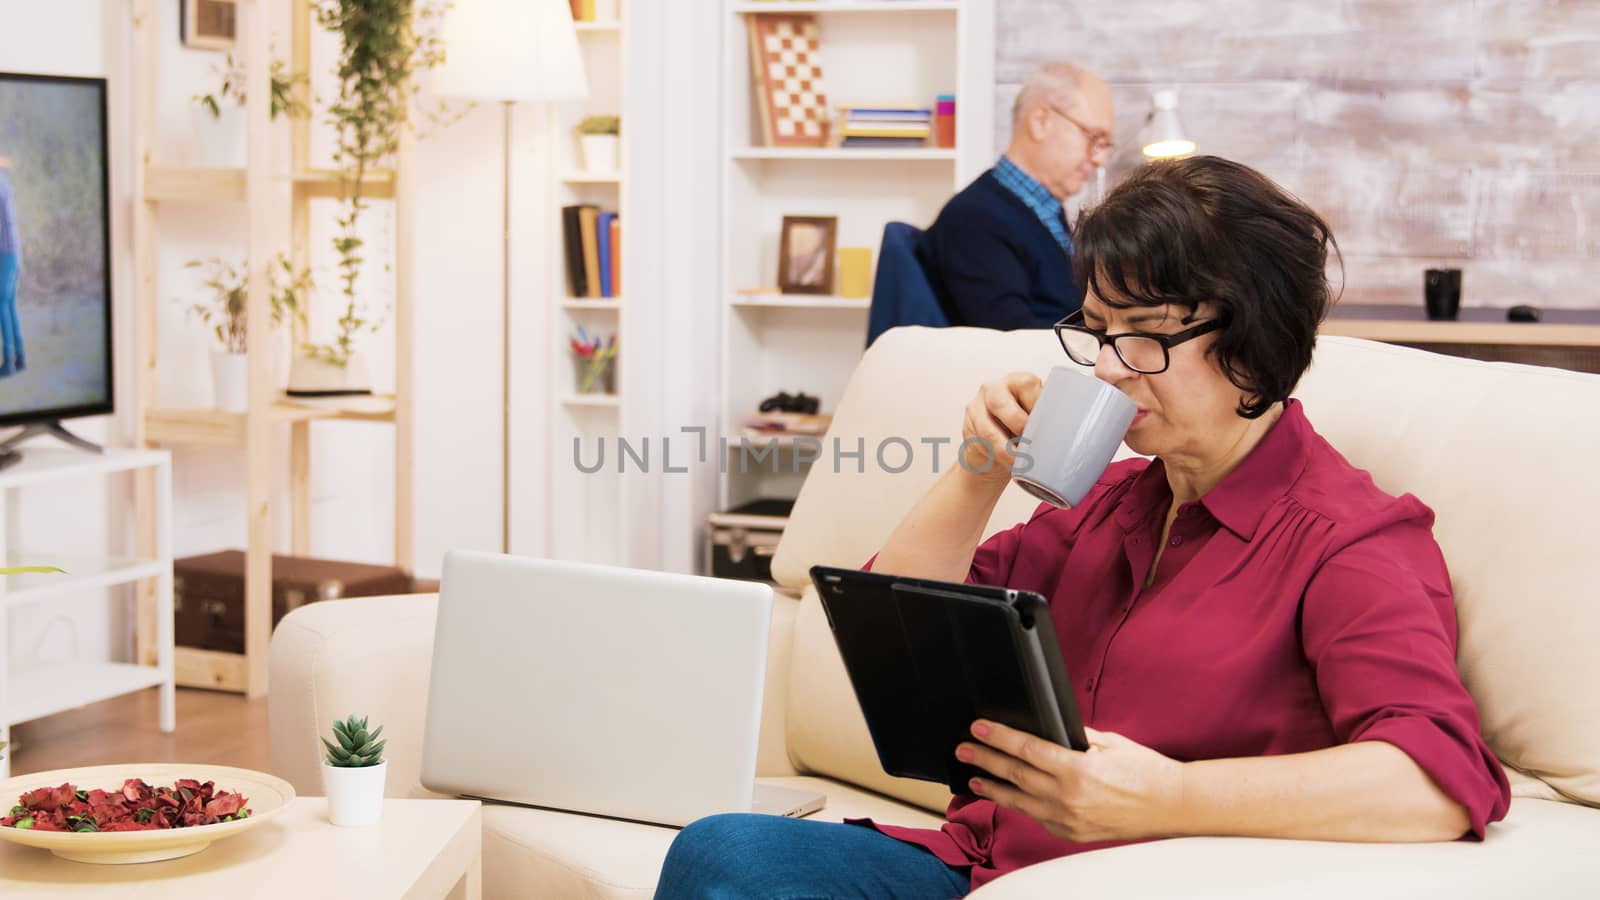 Zoom in shot of elderly age woman using tablet sitting on coich. Senior man reading a book in the background.